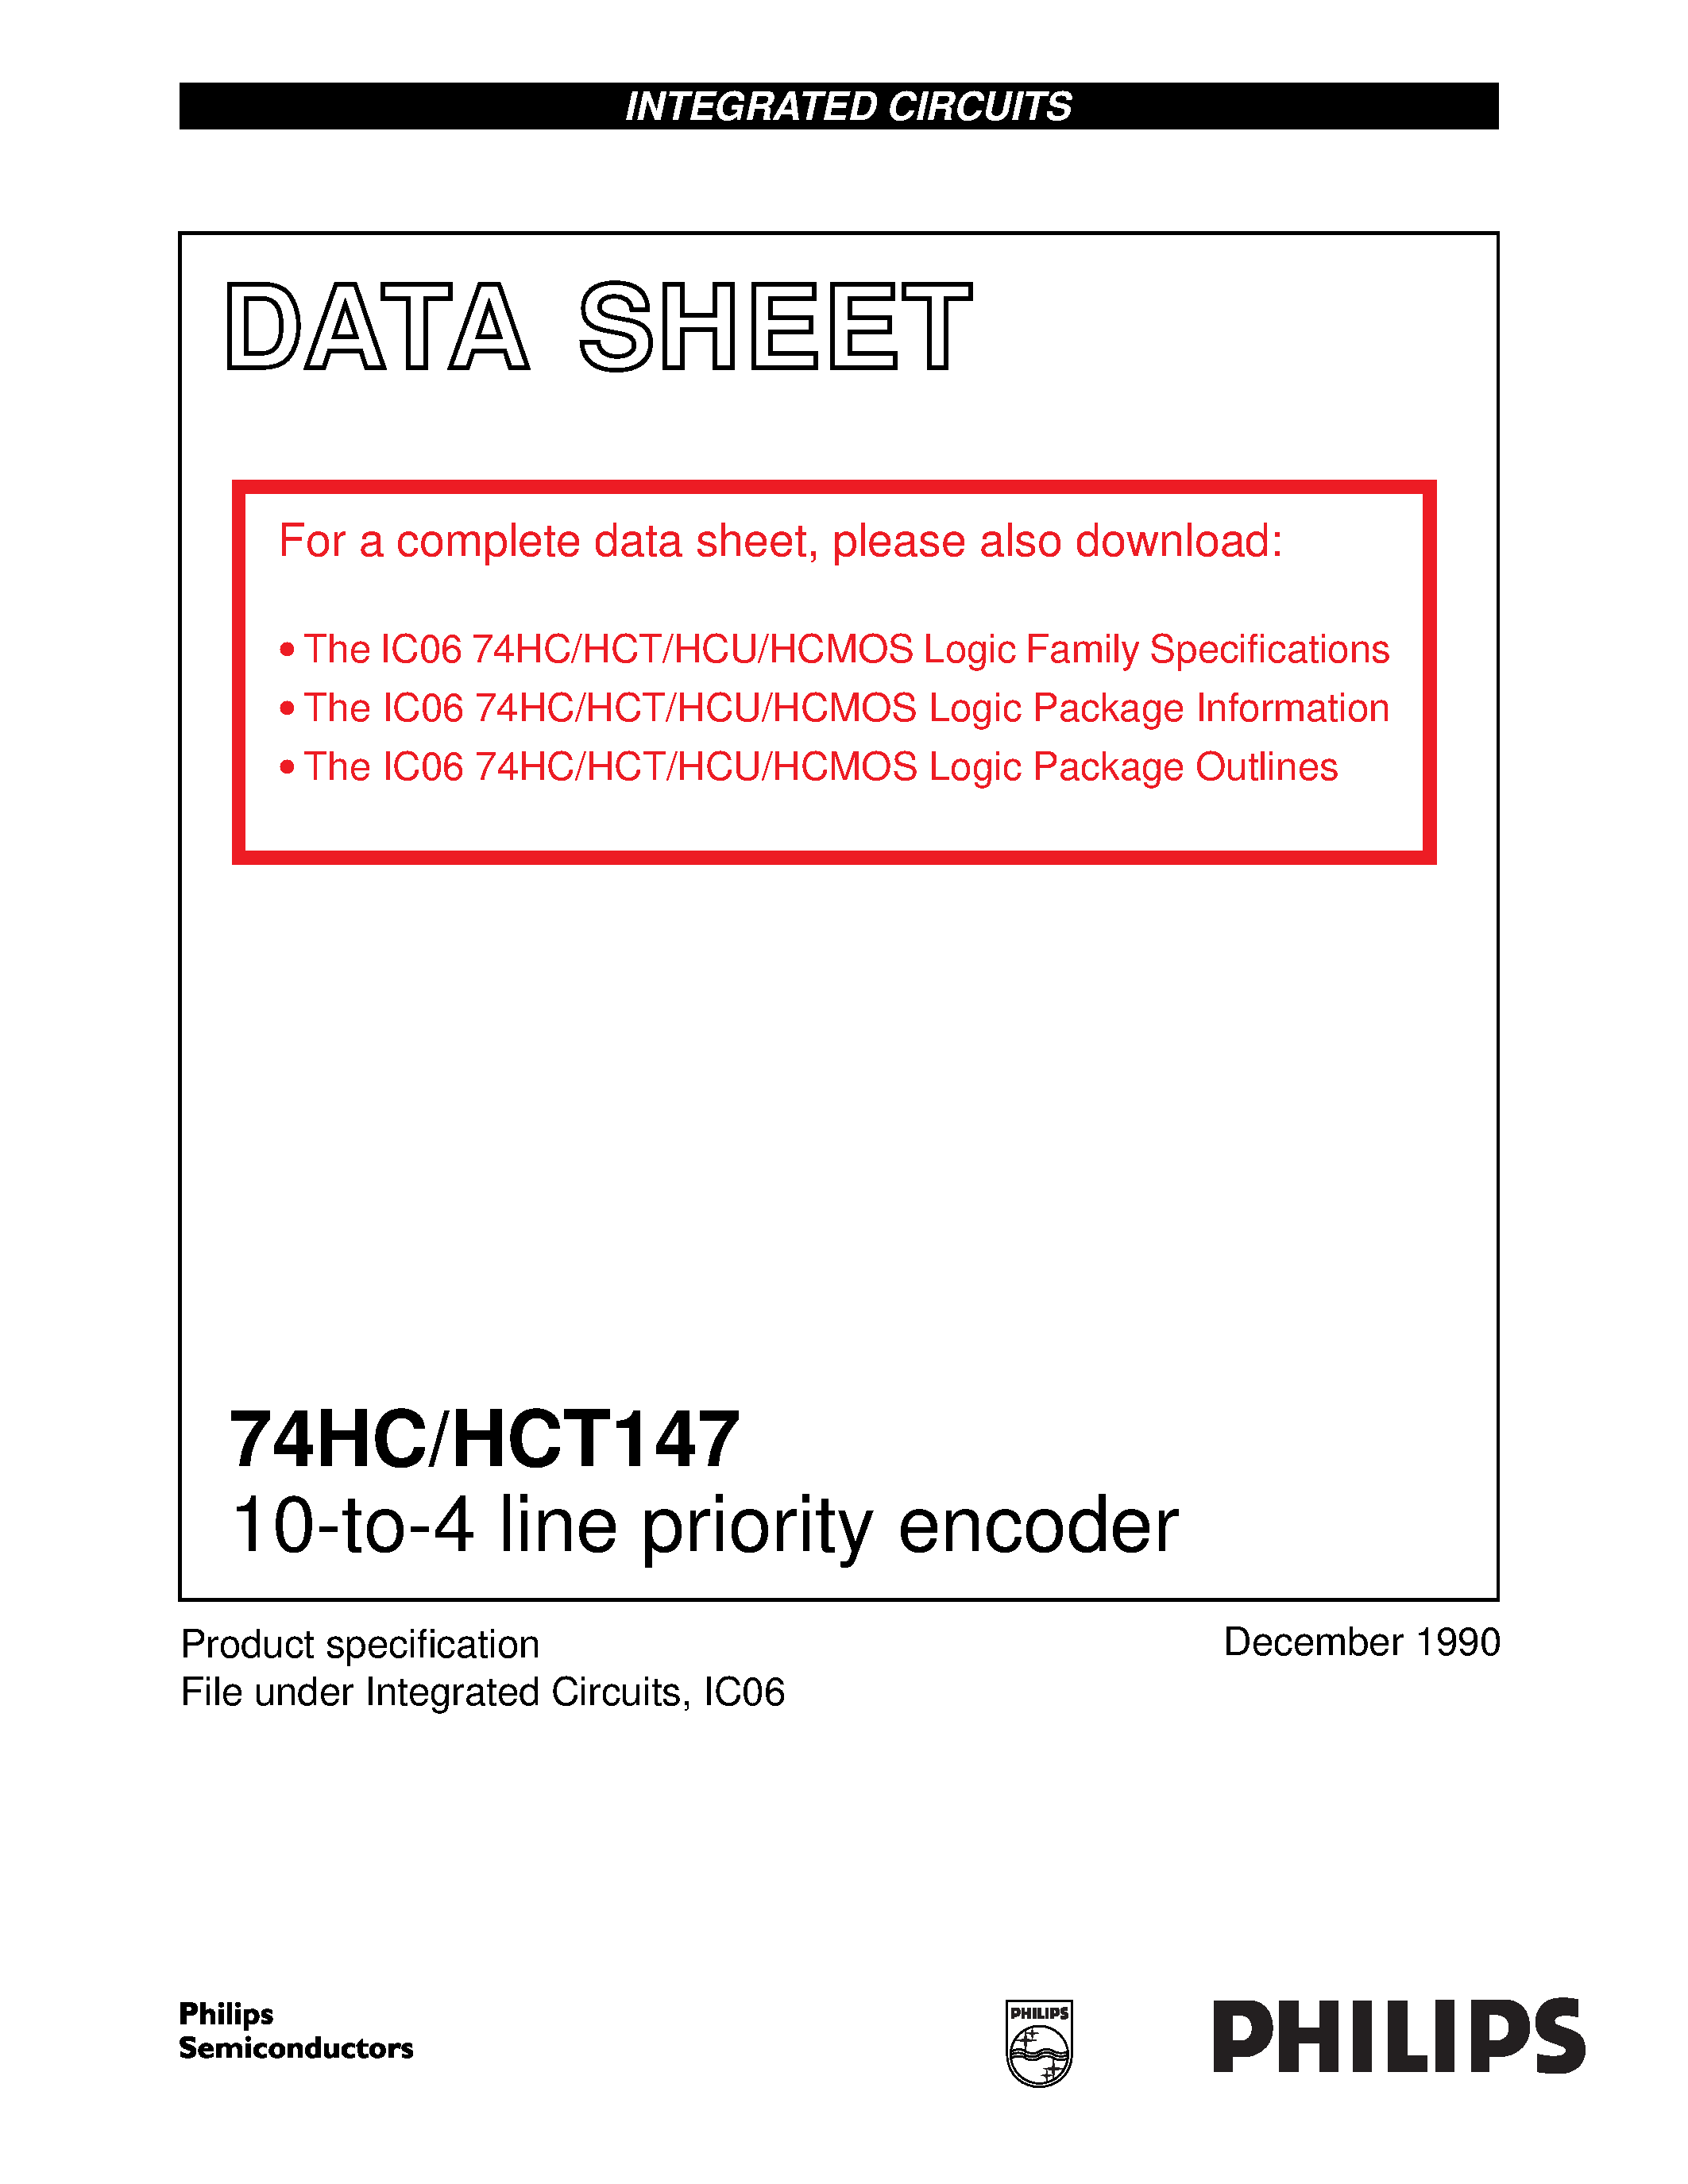 Datasheet 74HCT147 - 10-to-4 line priority encoder page 1